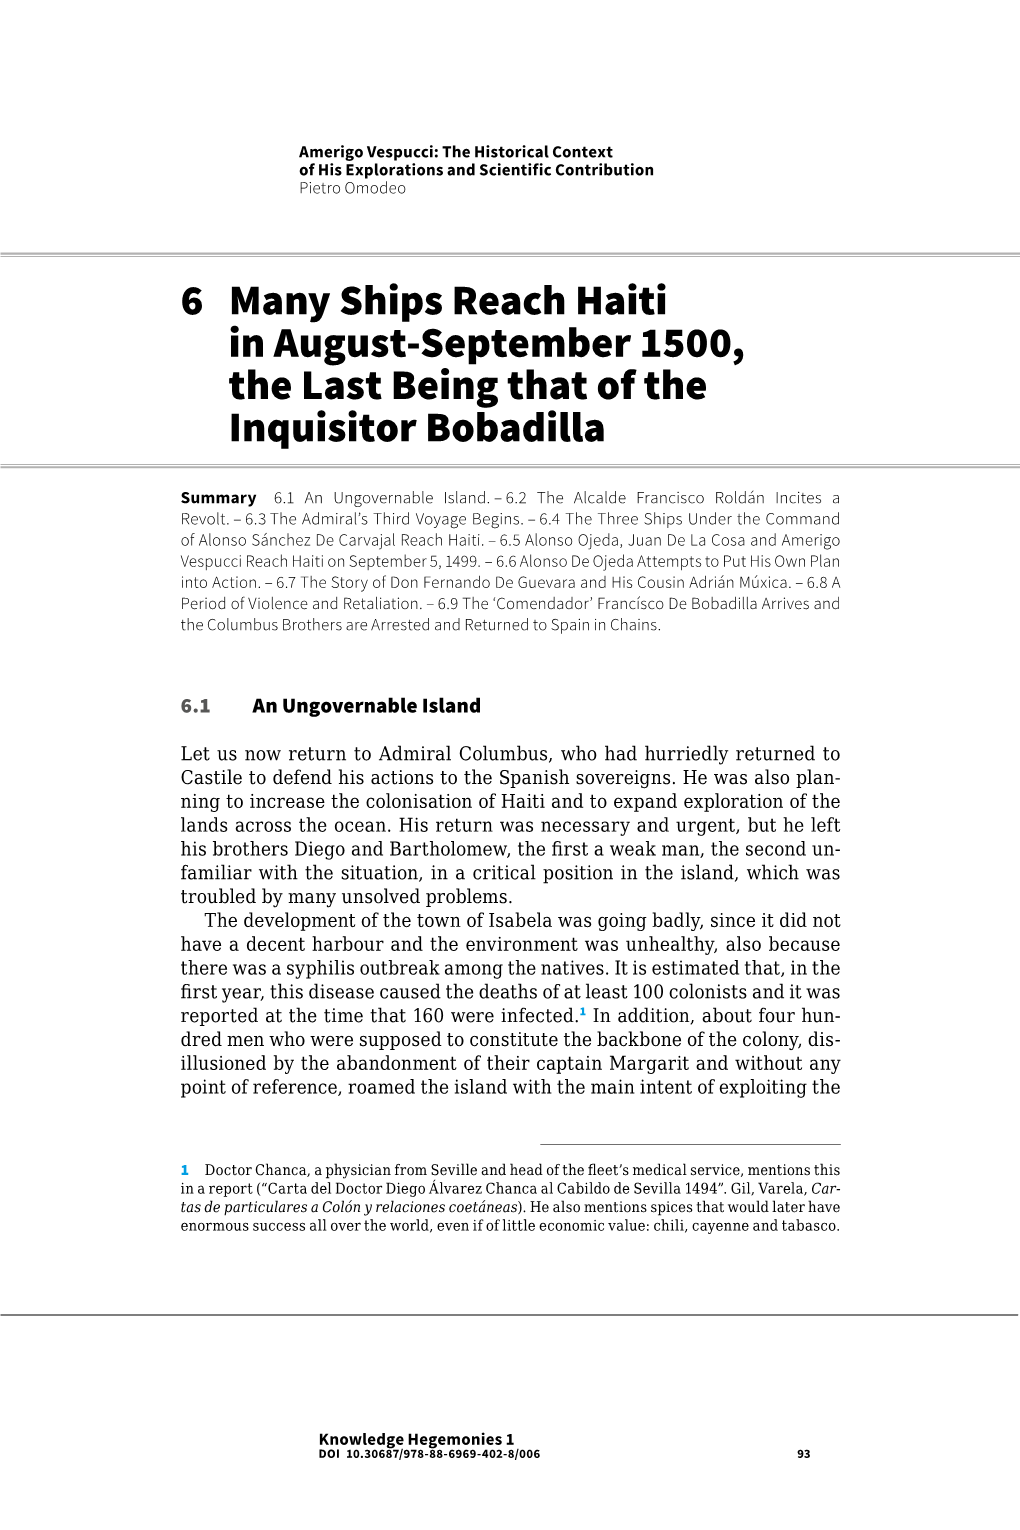 6 Many Ships Reach Haiti in August-September 1500, the Last Being That of the Inquisitor Bobadilla